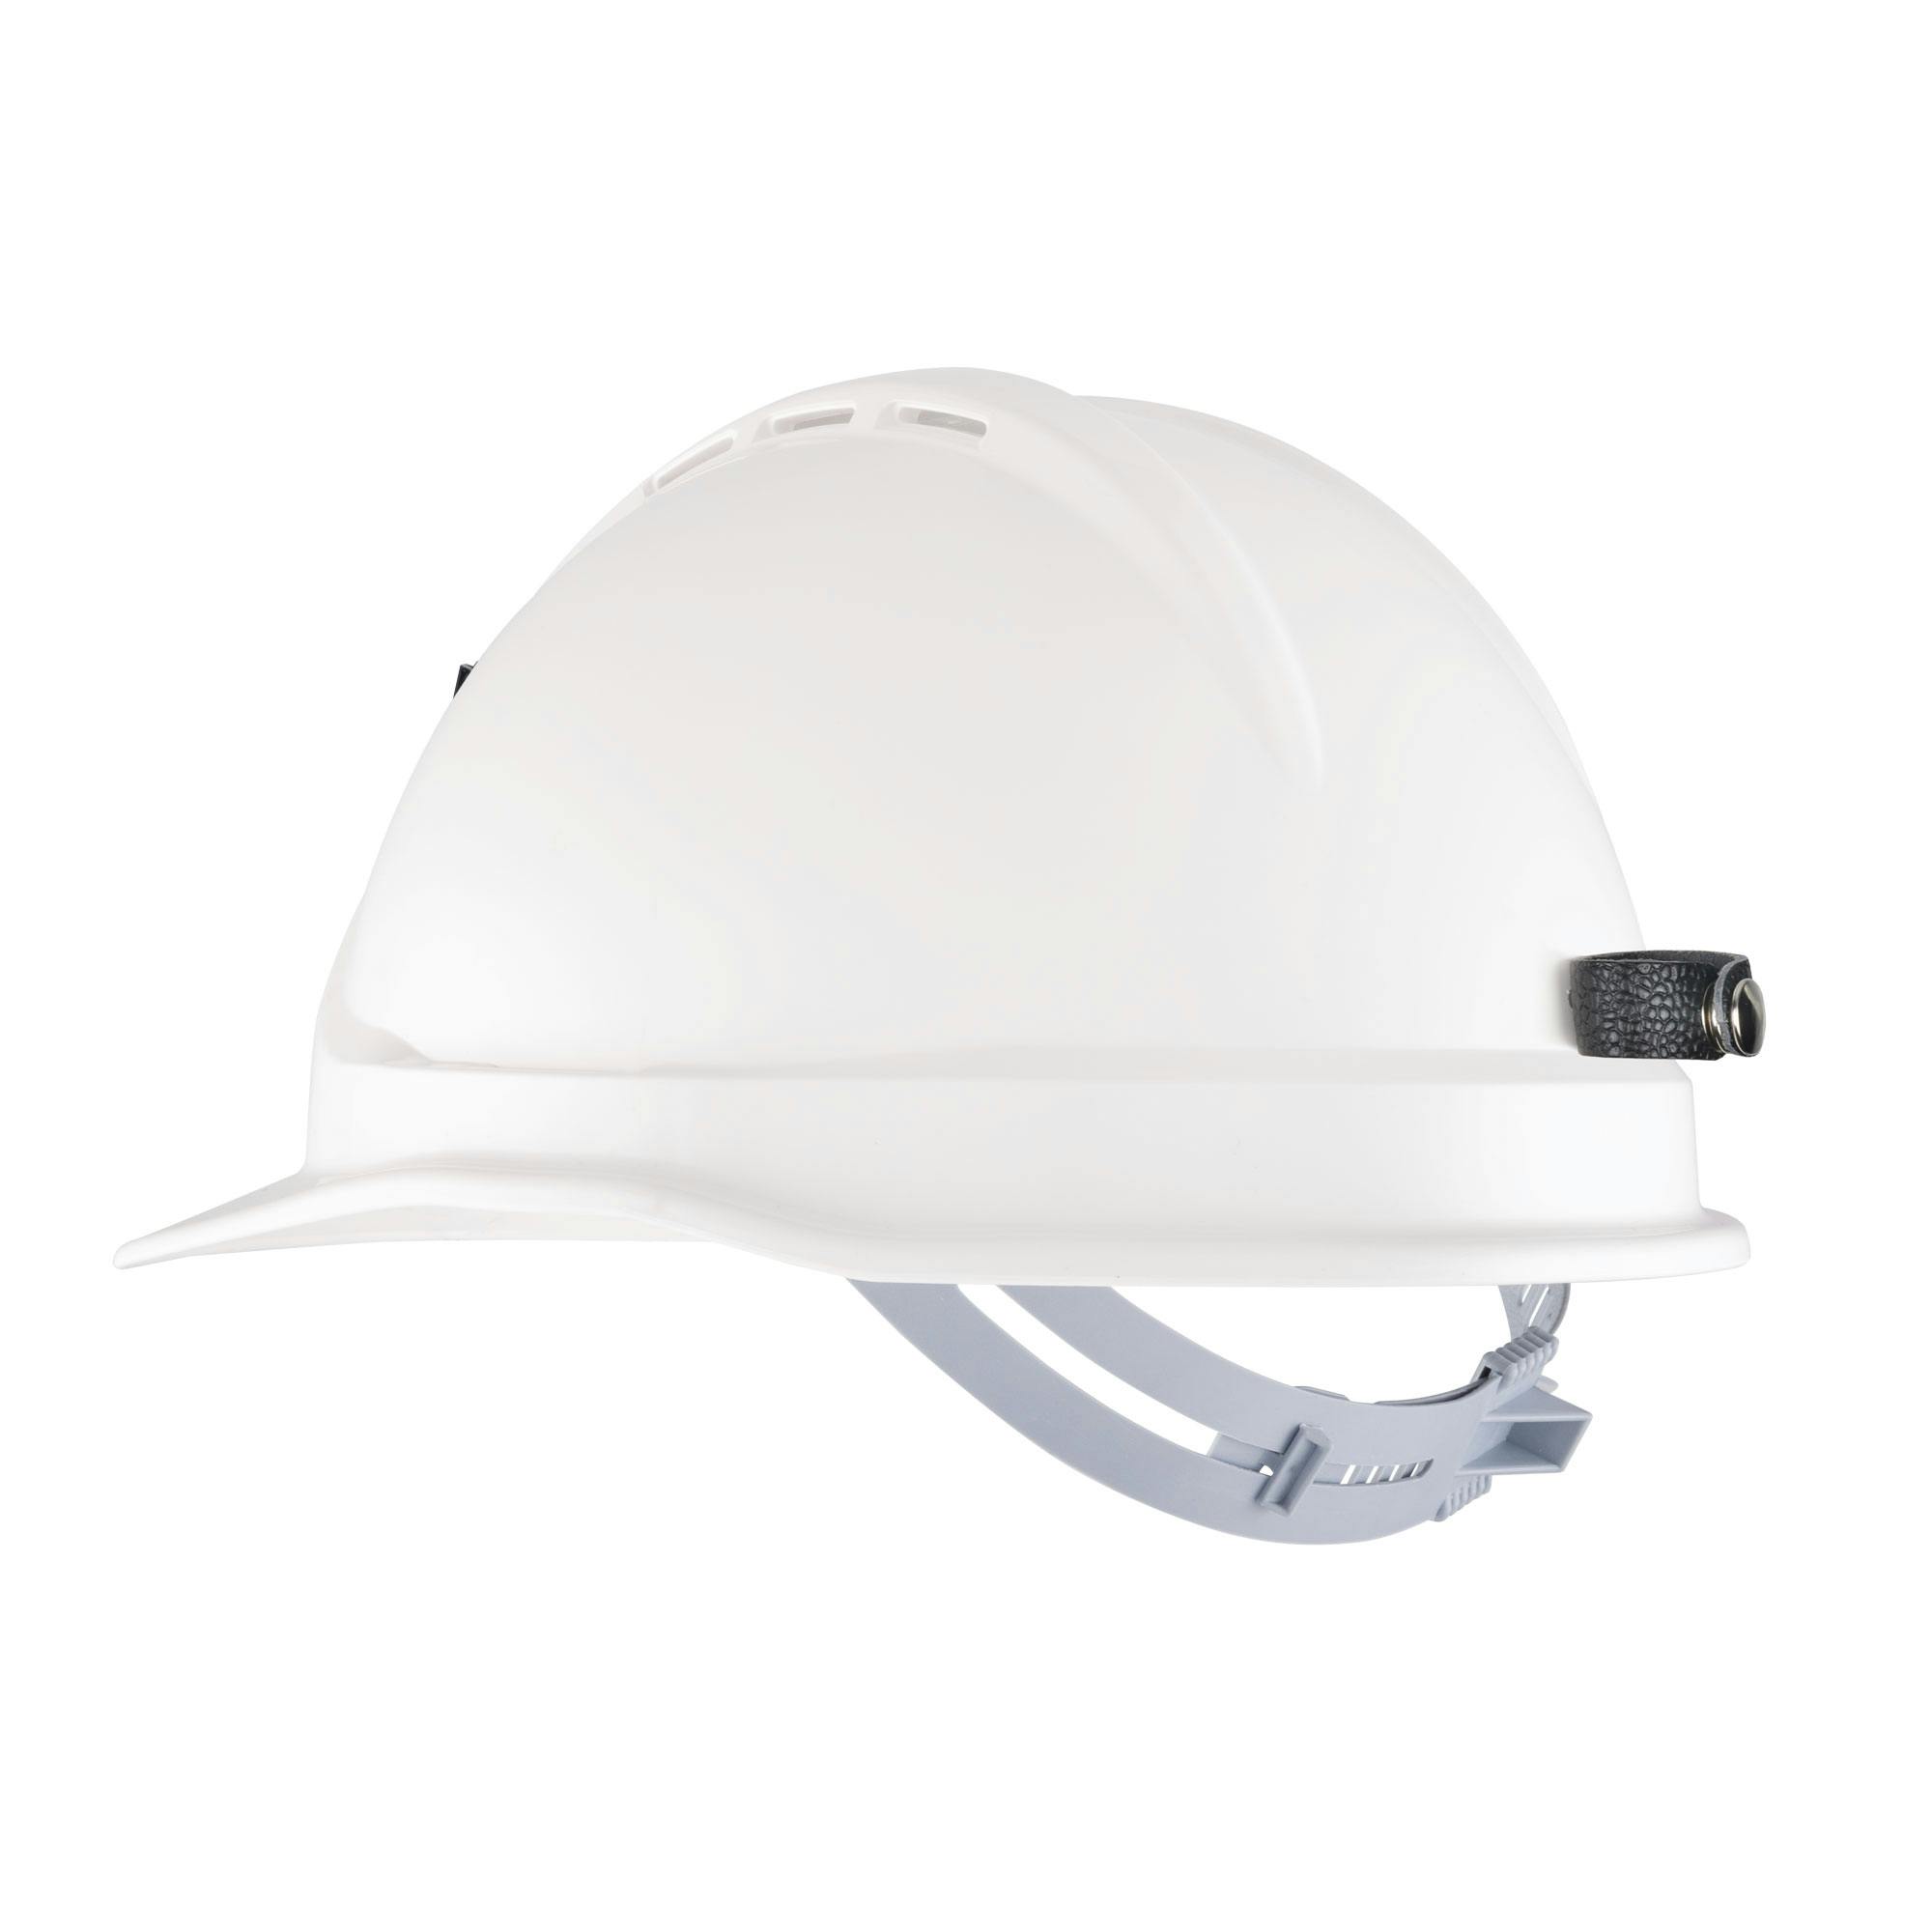 Force360 GTE9 ABS Vented Miners Hard Hat With Slide Lock Harness, Type1 (White)_0